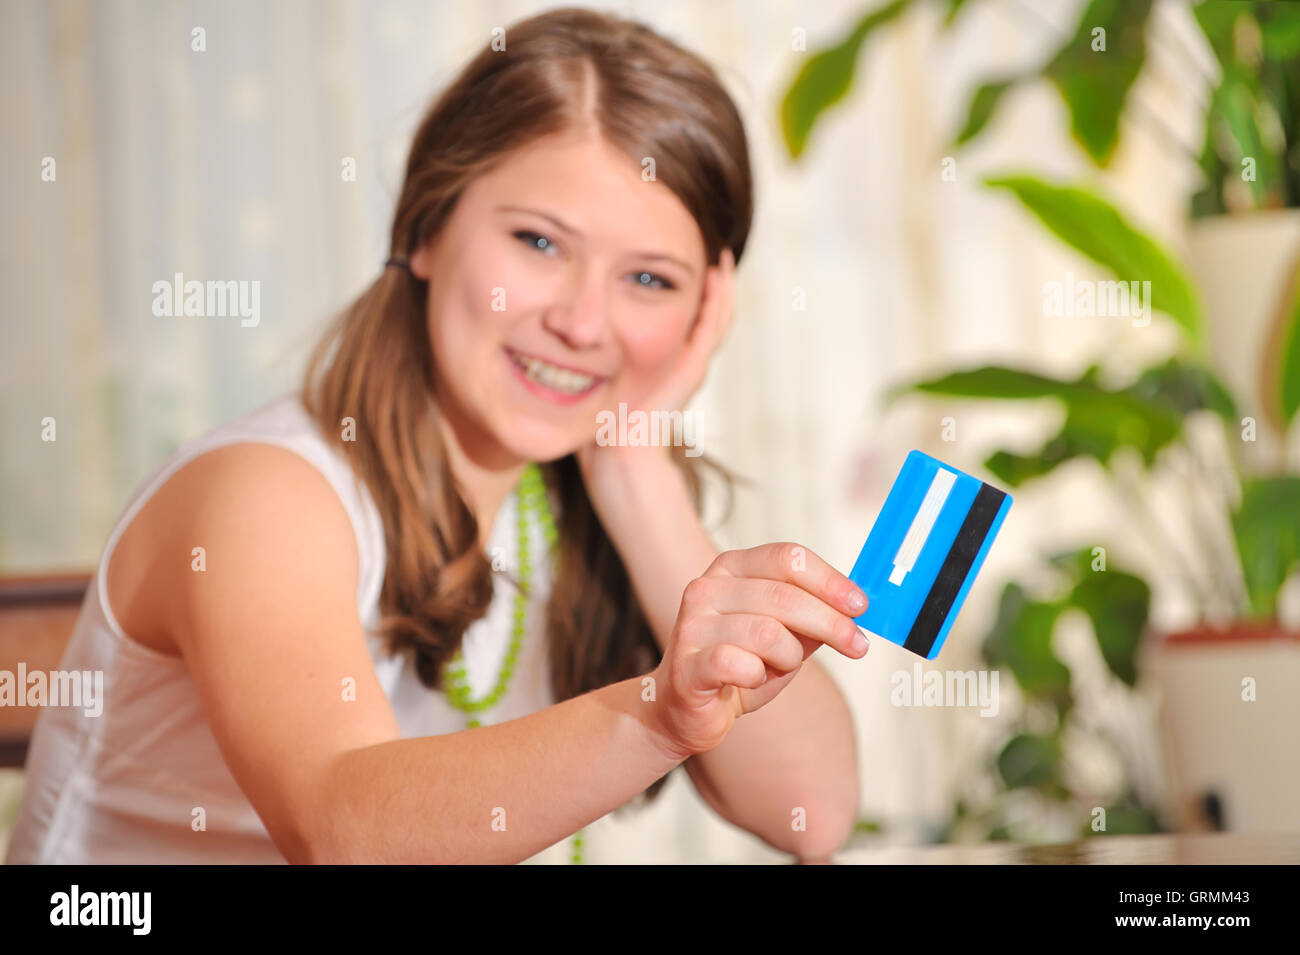 teen girl with blank credit card Stock Photo